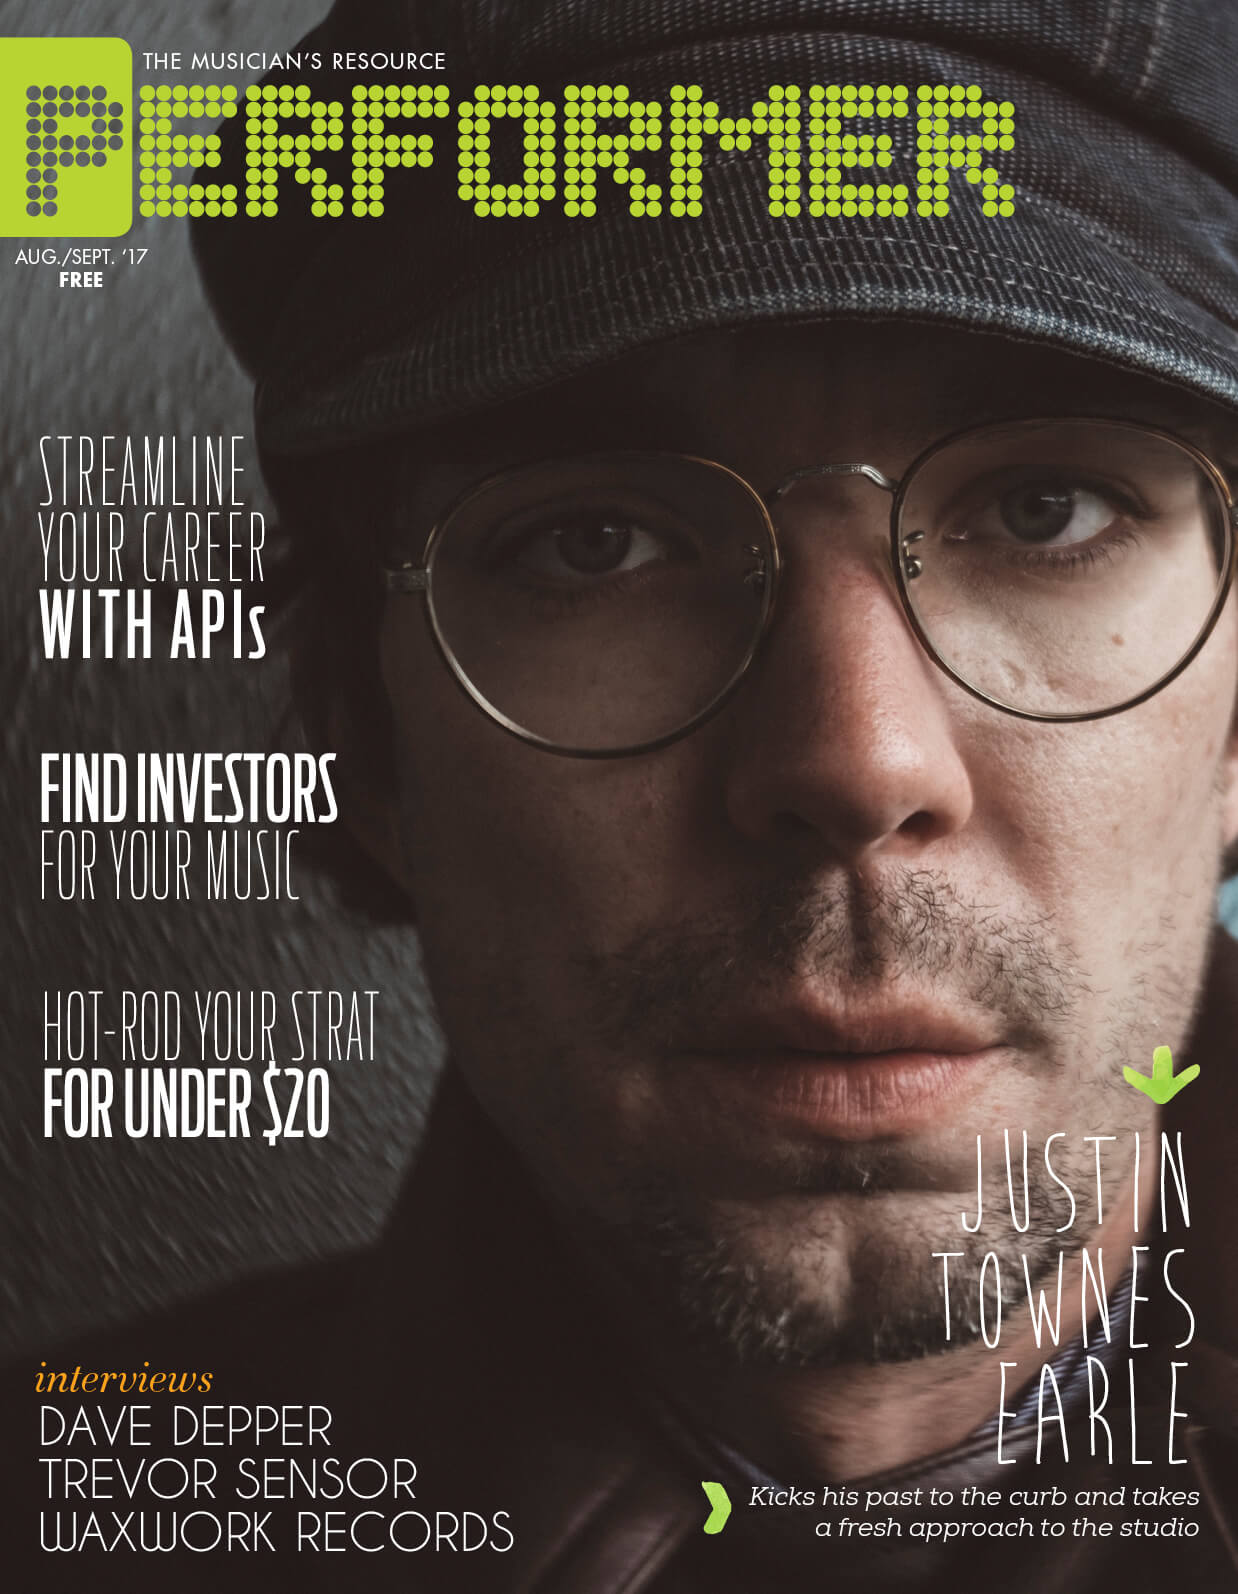 The New Issue is Out Now, Featuring Justin Townes Earle!